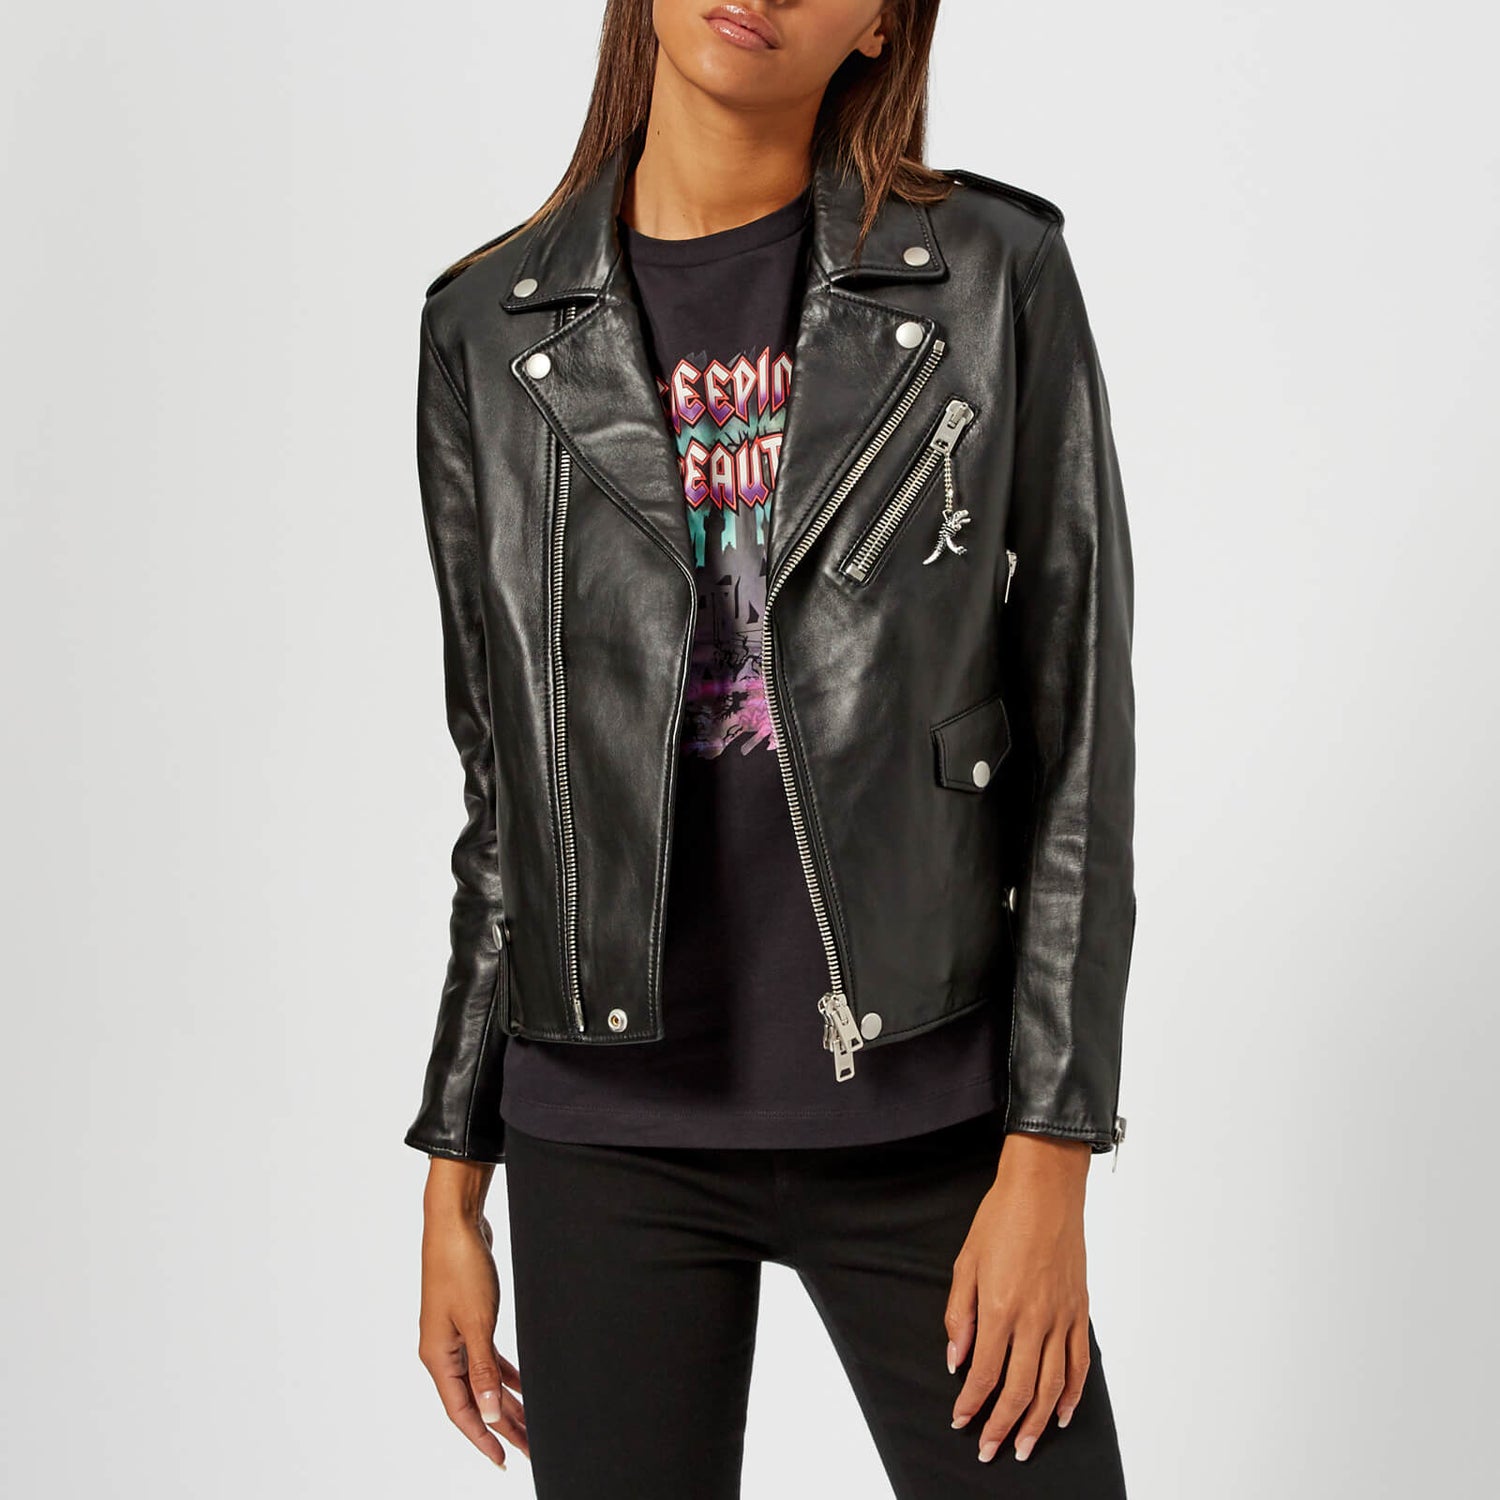 Coach 1941 Women's Moto Leather Jacket - Black - Free UK Delivery Available